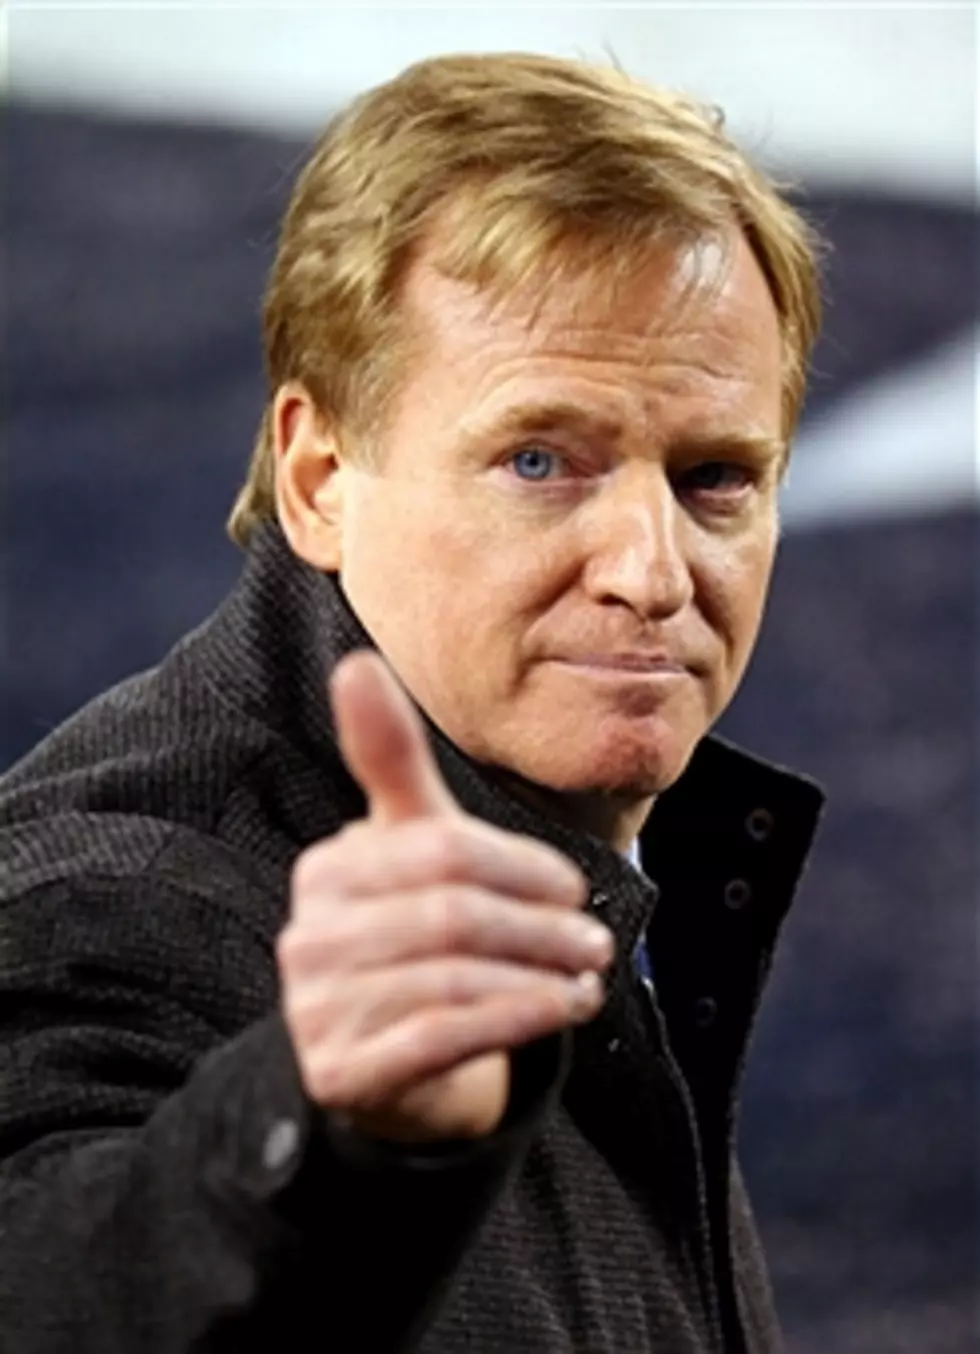 Roger Goodell Will Not Hear the Appeal of Roger Goodell&#8217;s Decision to Suspend Ray Rice Indefinitely, Which is Different from Roger Goodell&#8217;s Original Decison that Roger Goodell Made &#8211; From the Bird&#8217;s Nest